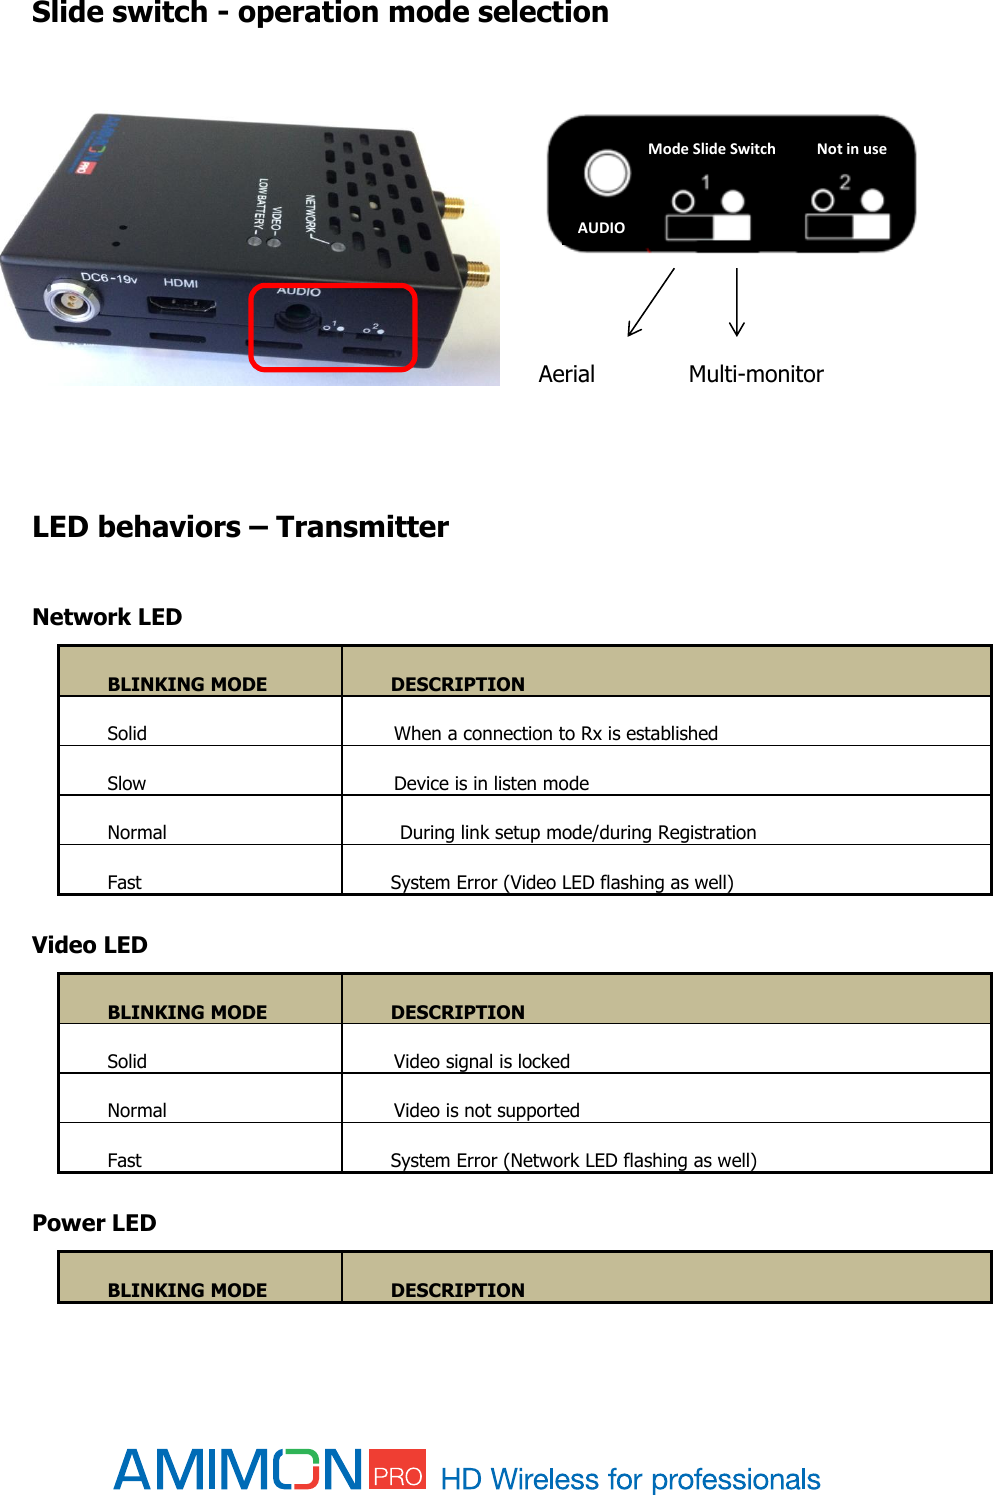    Slide switch - operation mode selection              LED behaviors – Transmitter    Network LED BLINKING MODE DESCRIPTION Solid        When a connection to Rx is established Slow          Device is in listen mode Normal         During link setup mode/during Registration Fast System Error (Video LED flashing as well)   Video LED BLINKING MODE DESCRIPTION Solid        Video signal is locked Normal        Video is not supported Fast System Error (Network LED flashing as well)  Power LED BLINKING MODE DESCRIPTION Mode Slide Switch Aerial mode Not in use Multi-monitor mode AUDIO 